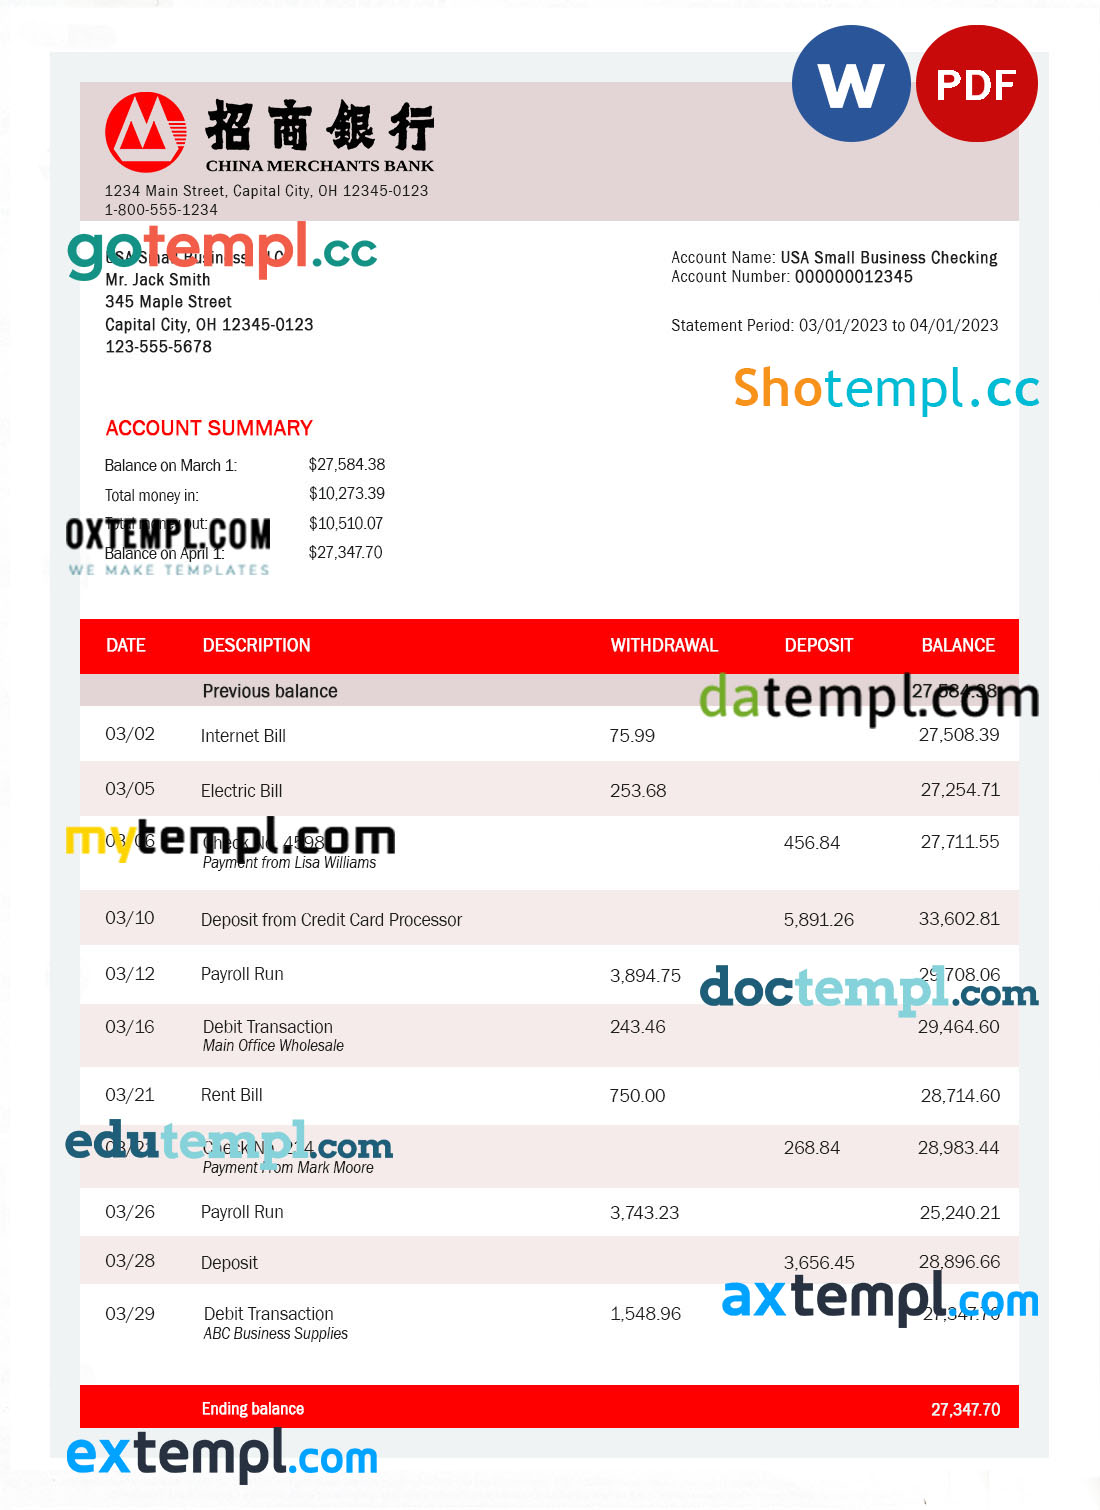 editable template, China Merchants bank firm account statement Word and PDF template